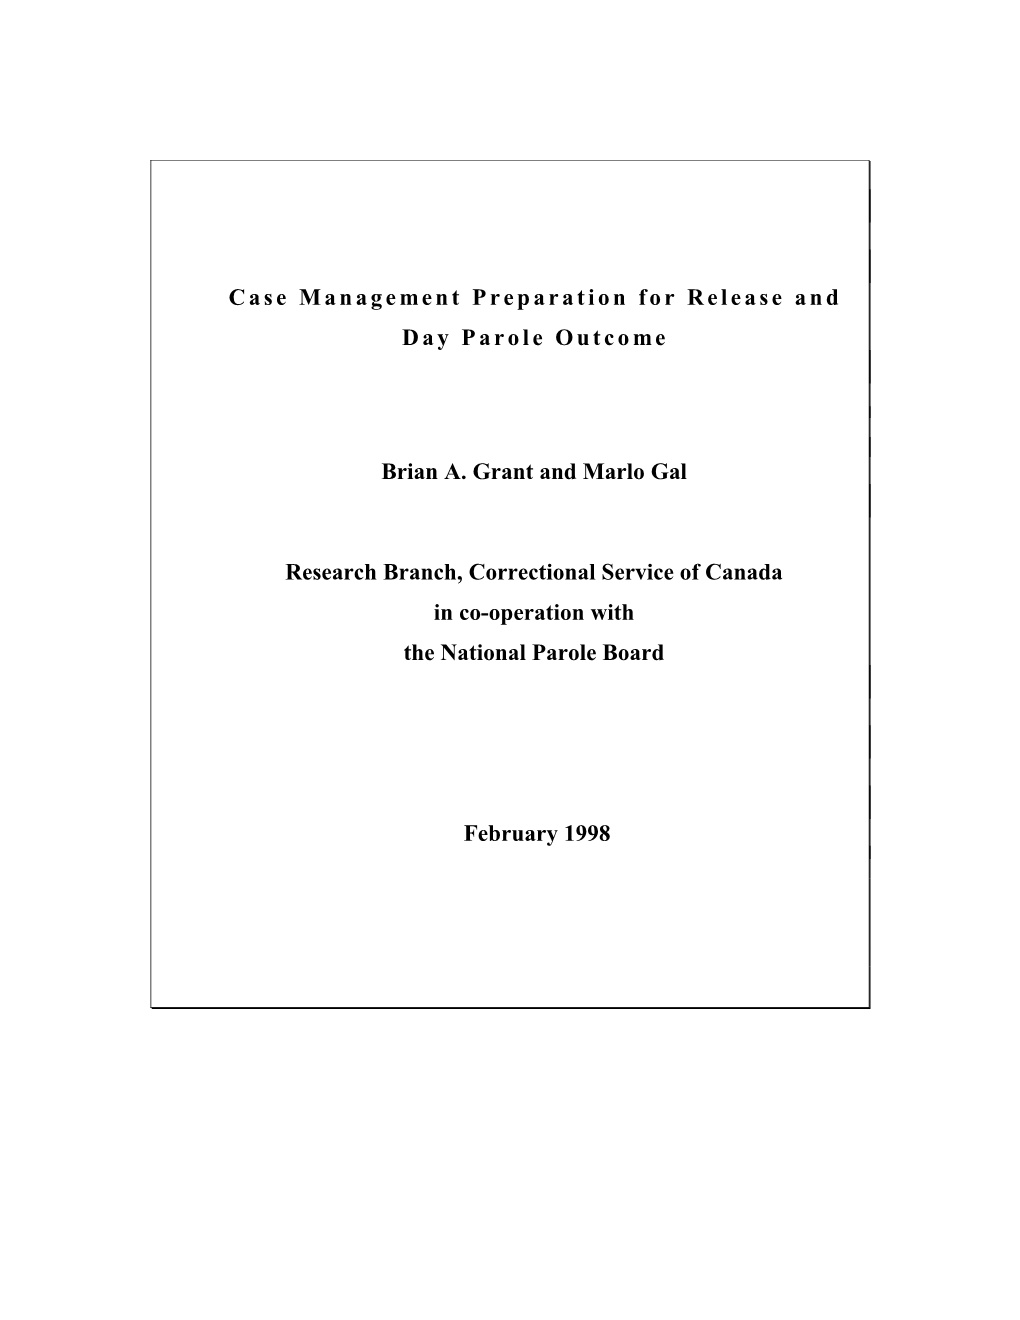 Case Management Preparation for Release and Day Parole Outcome